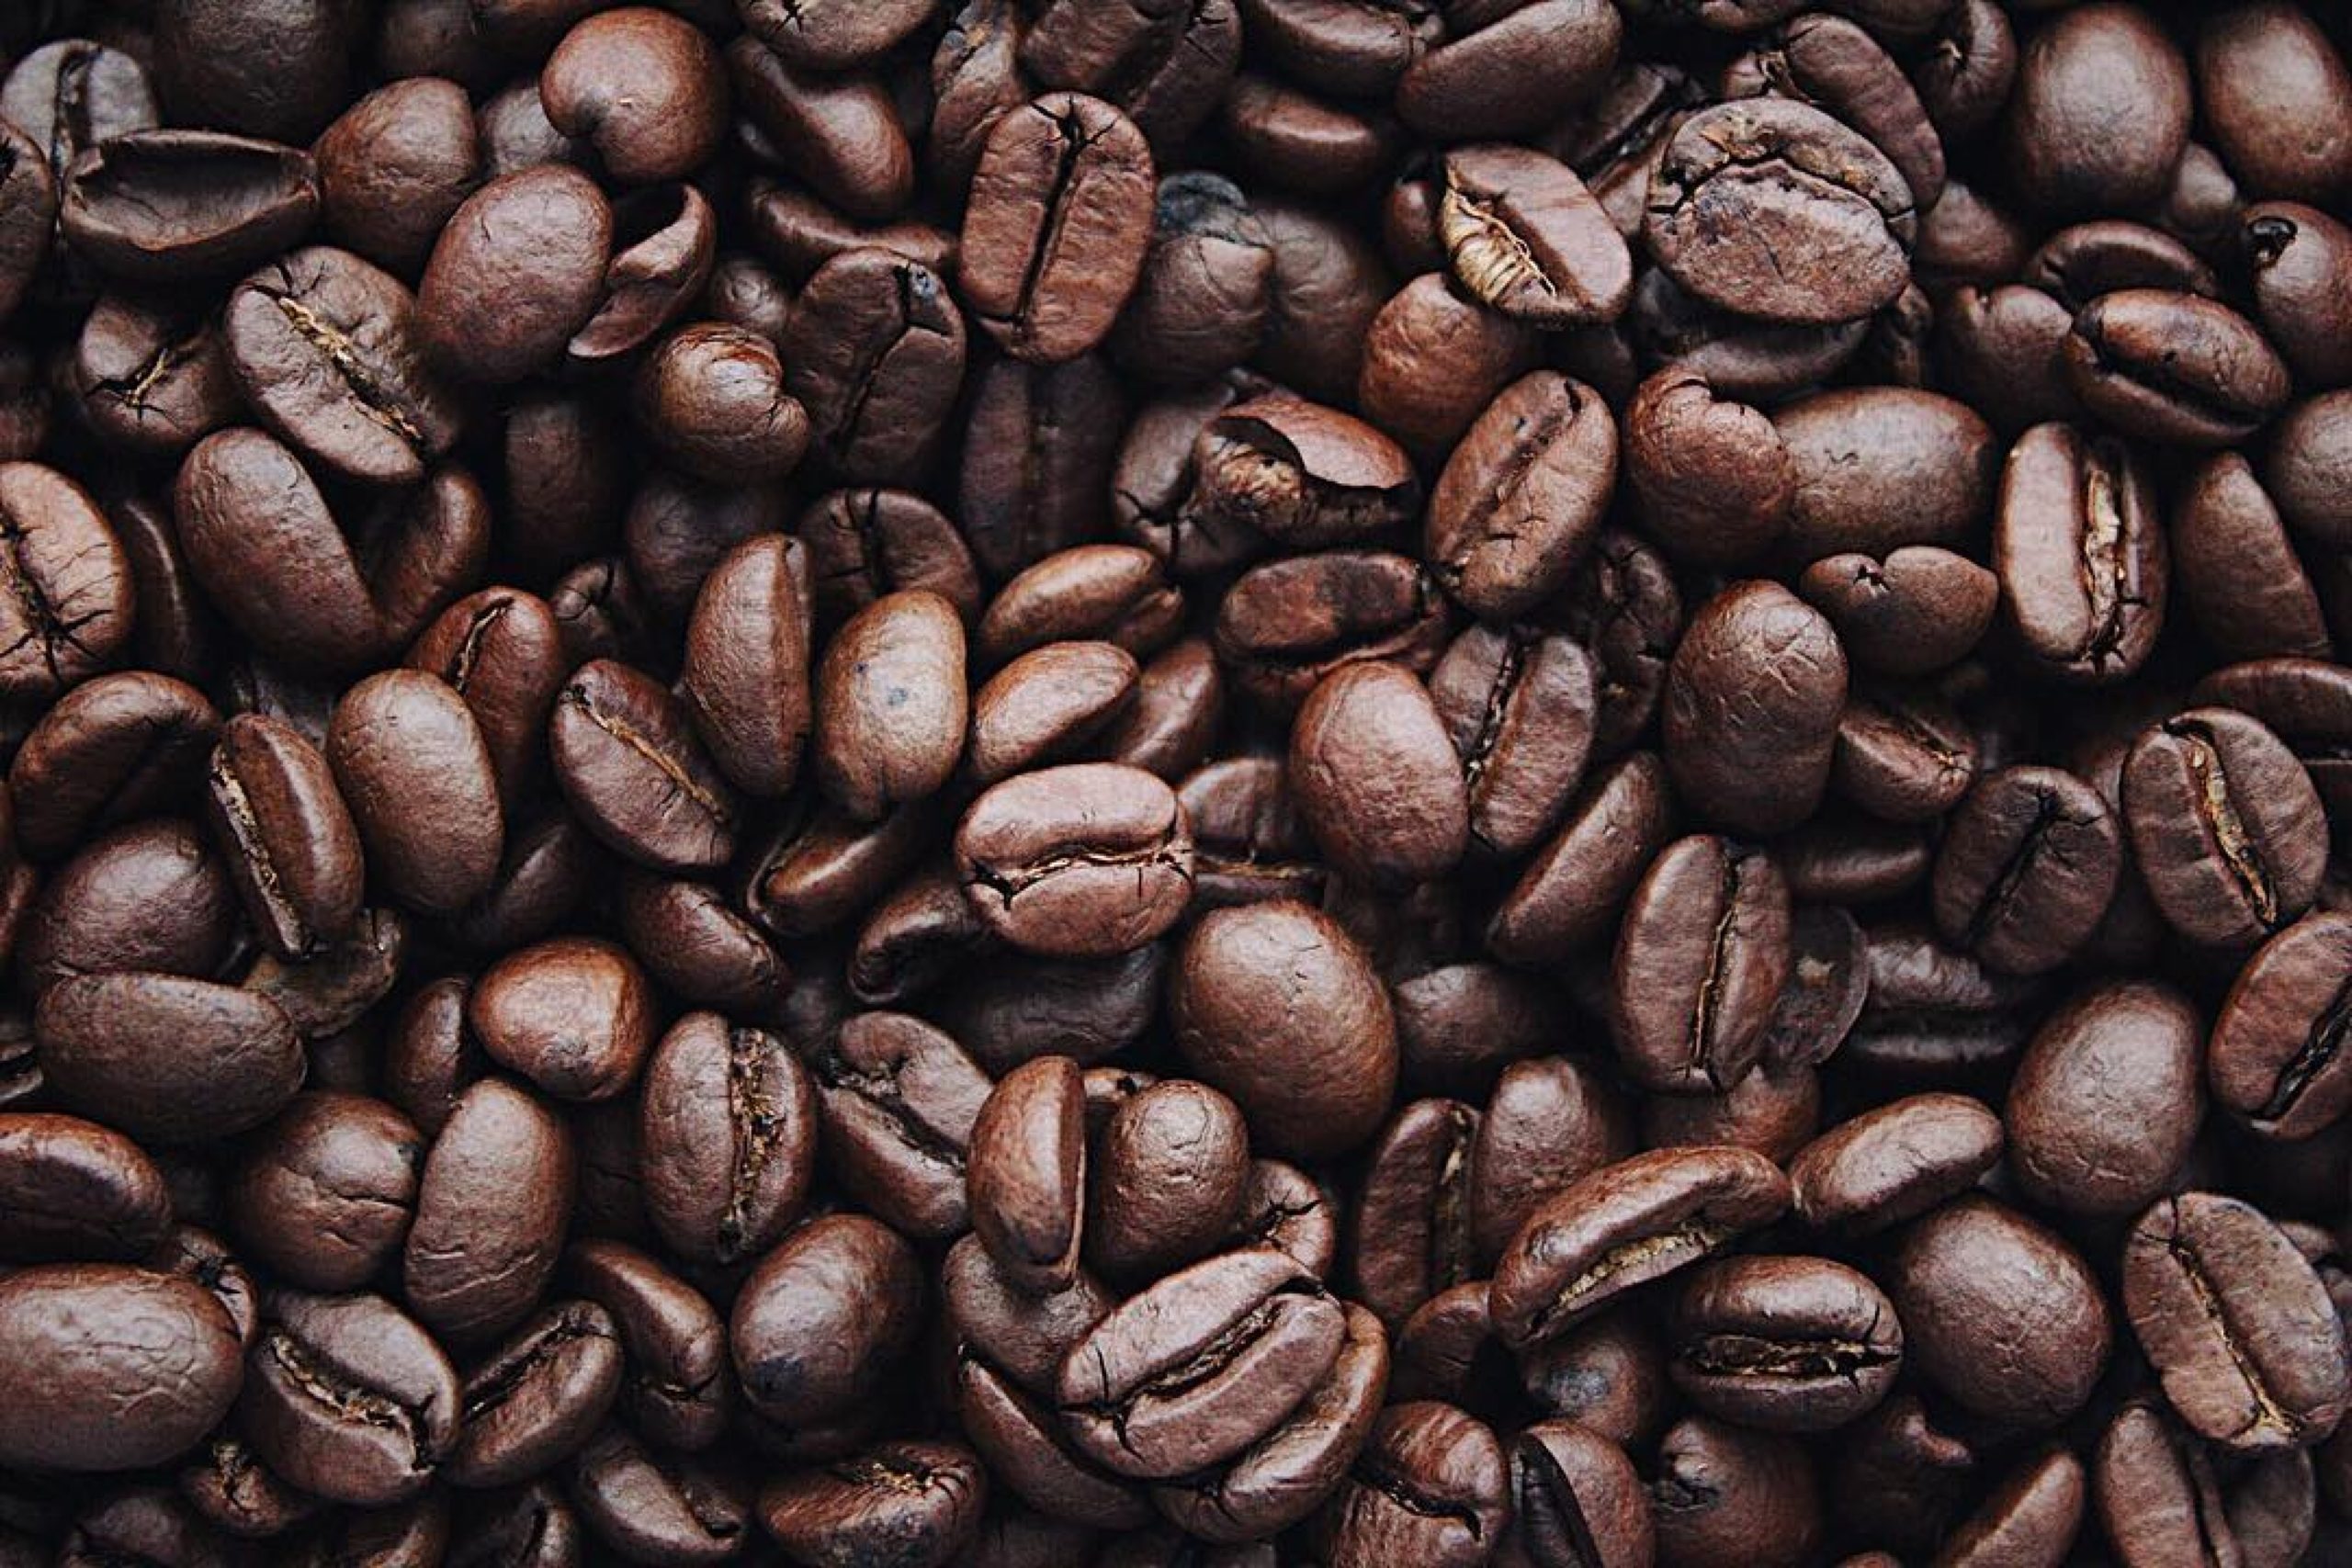 Should you drink caffeine while in recovery